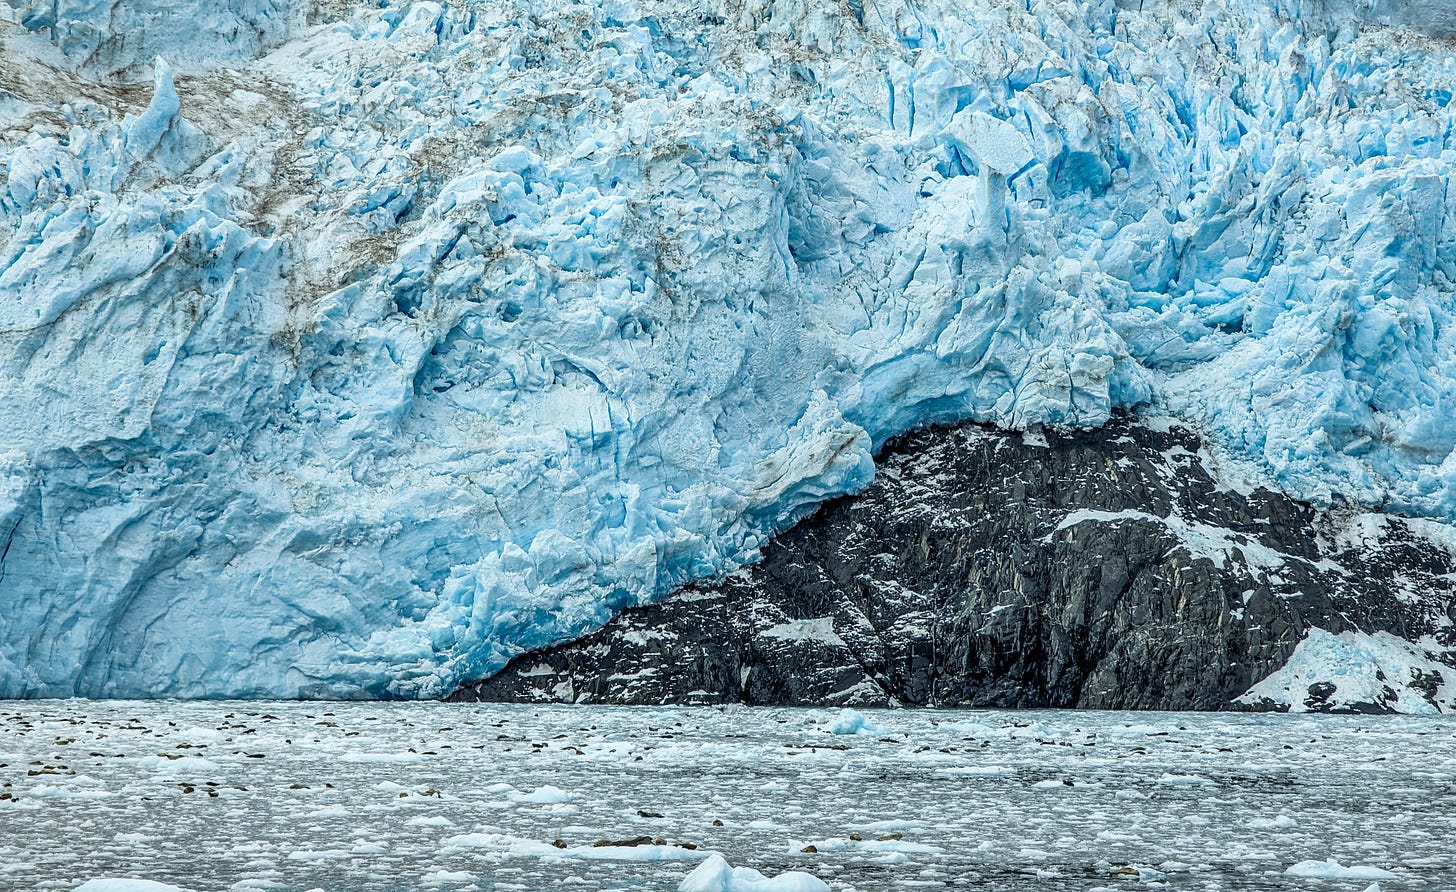 Close-up of Holgate Glacier's terminus which is filled with blue ice.